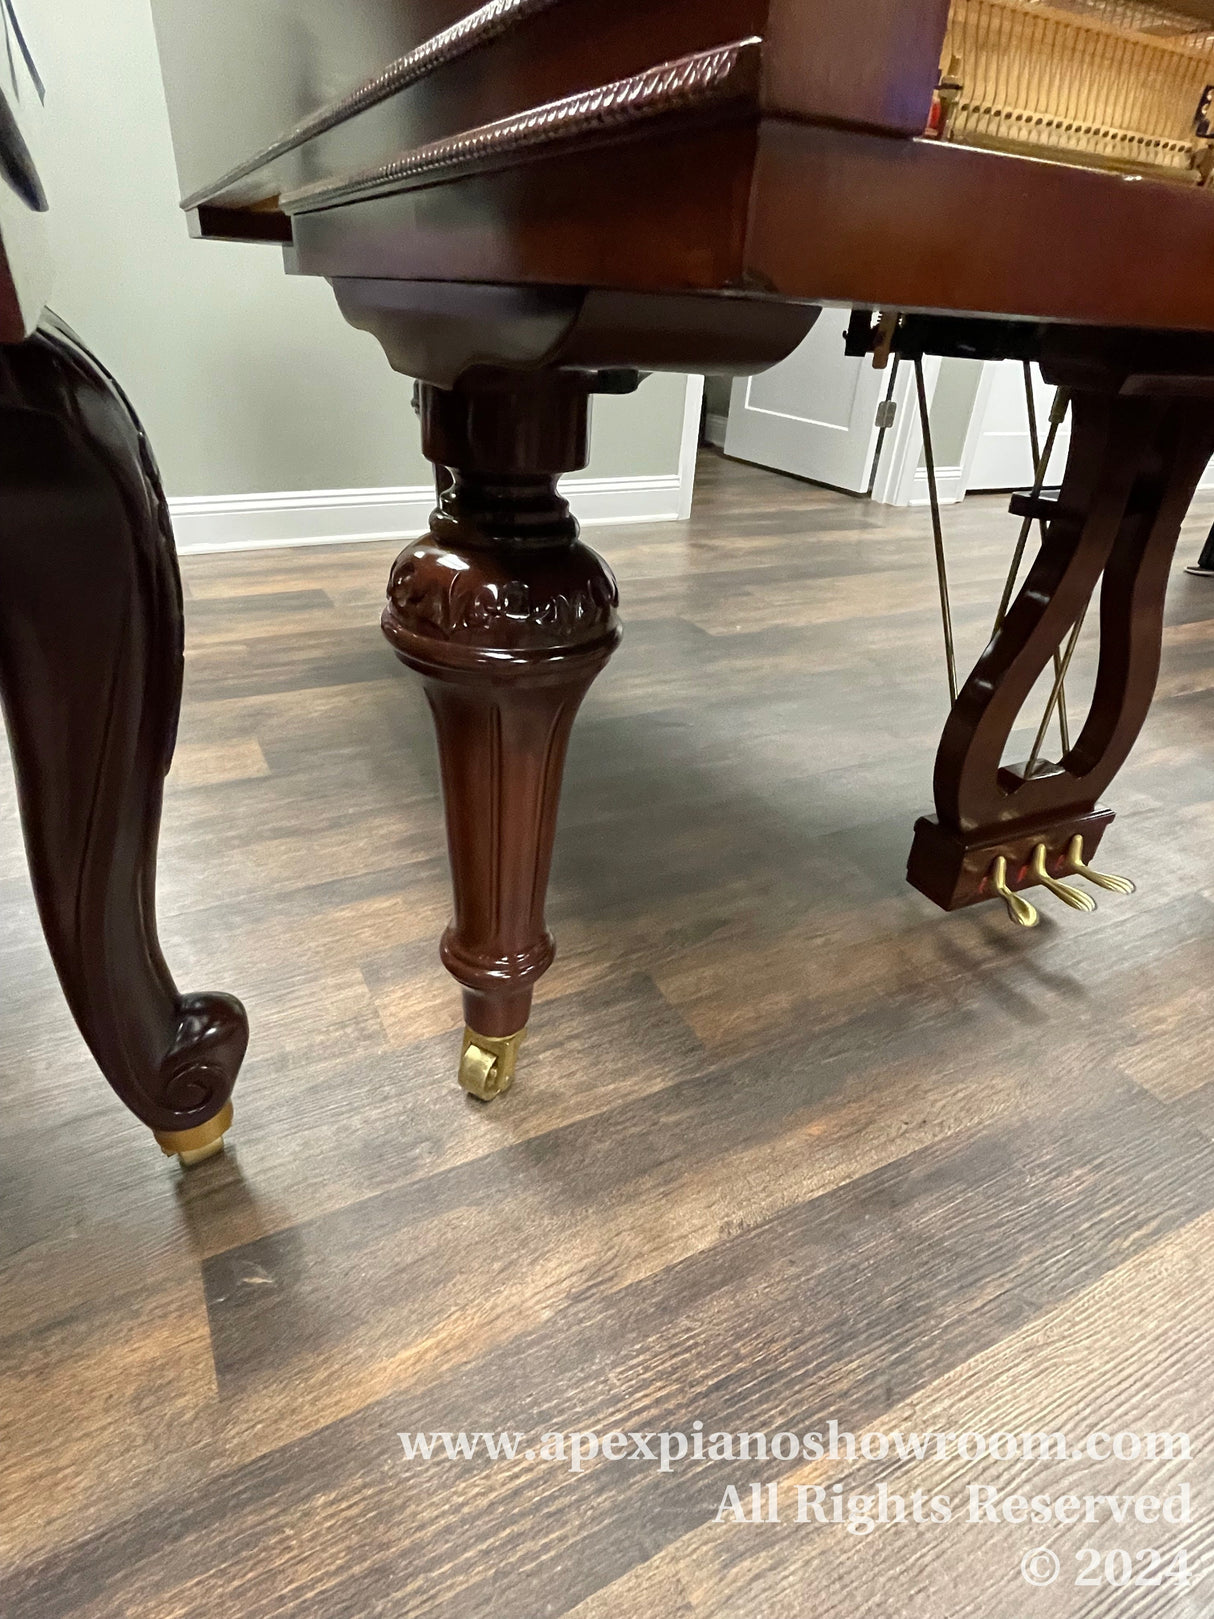 Close-up view of the elegantly carved legs and casters of a polished mahogany grand piano, highlighting the craftsmanship and stability features designed for easy positioning within a showroom or home environment.